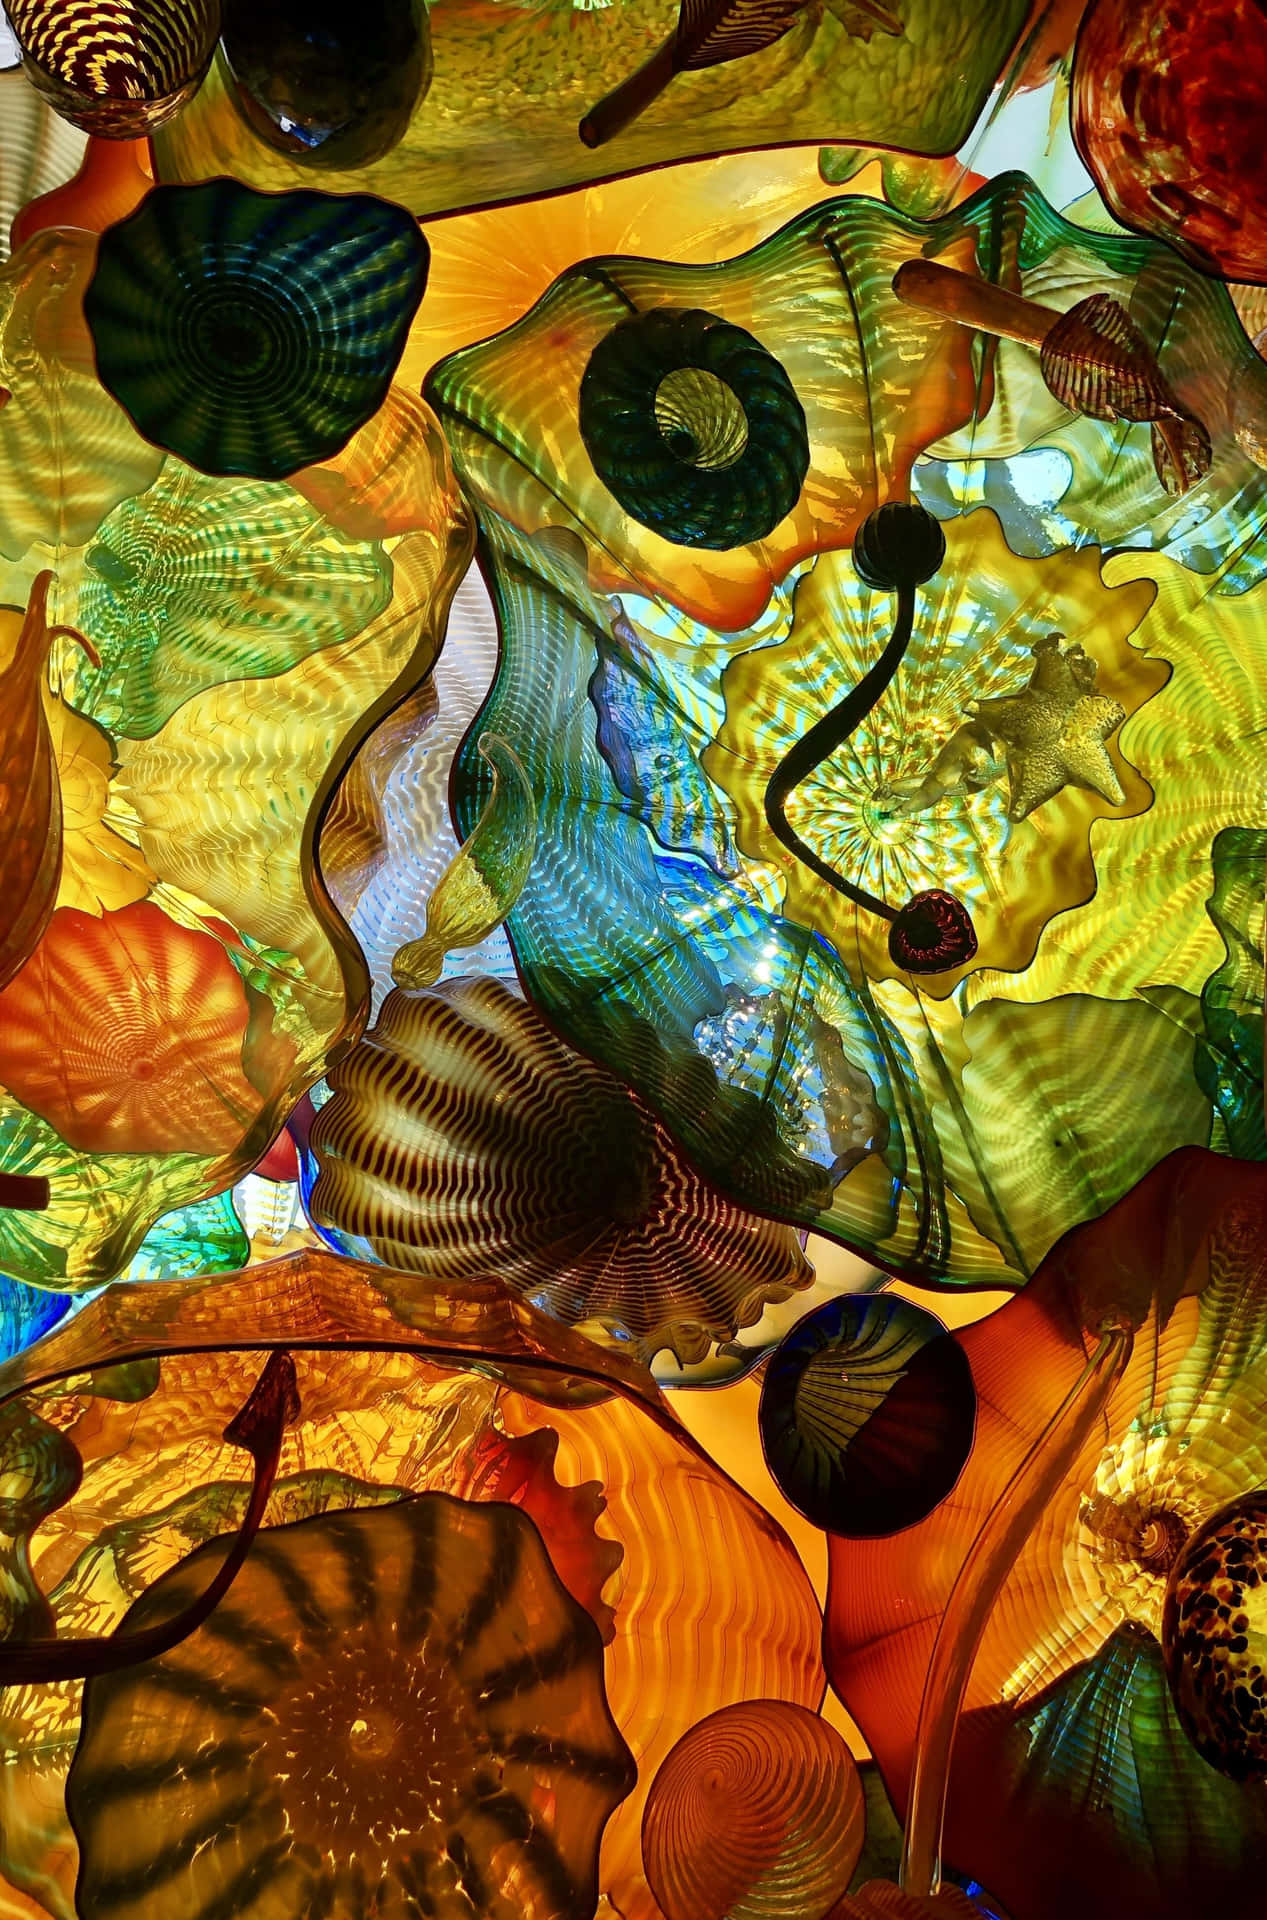 Chihuly Glasshouse Ceiling Art Wallpaper